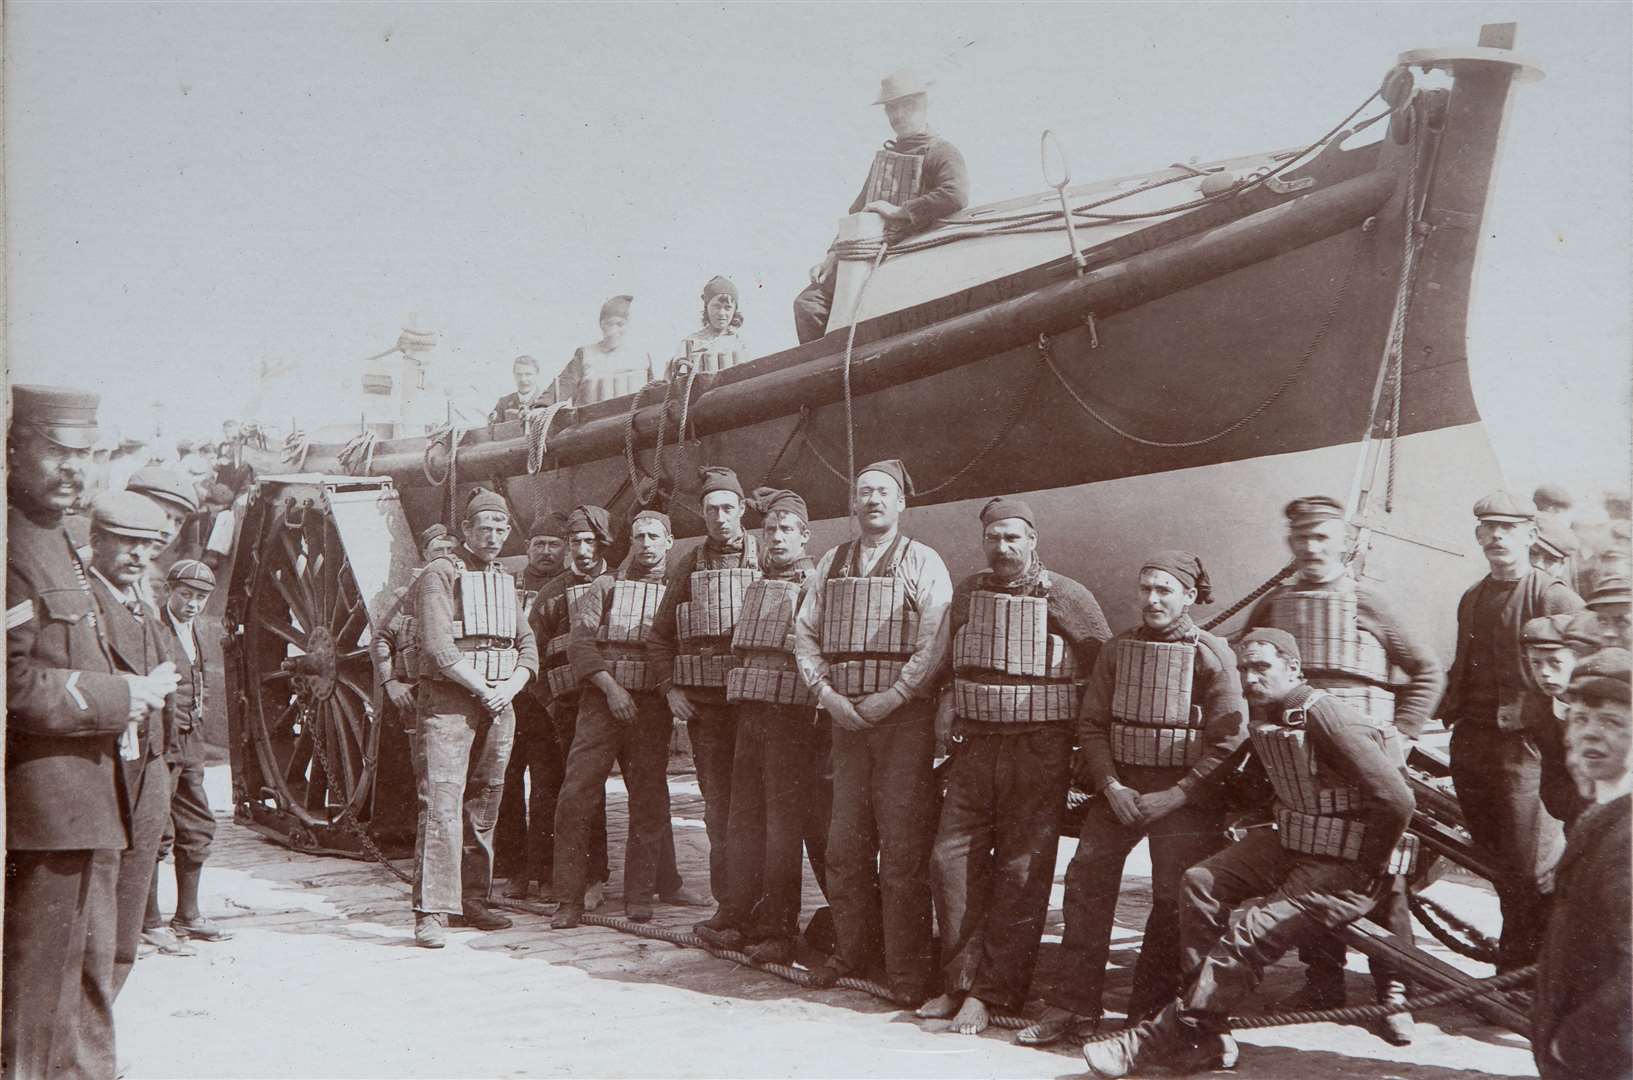 Cork lifejackets were the first lifesaving devices to be issued to crews but had to be flexible enough for men as they rowed. Pictured are Whitby crews circa 1900 with their kit. Image: RNLI.